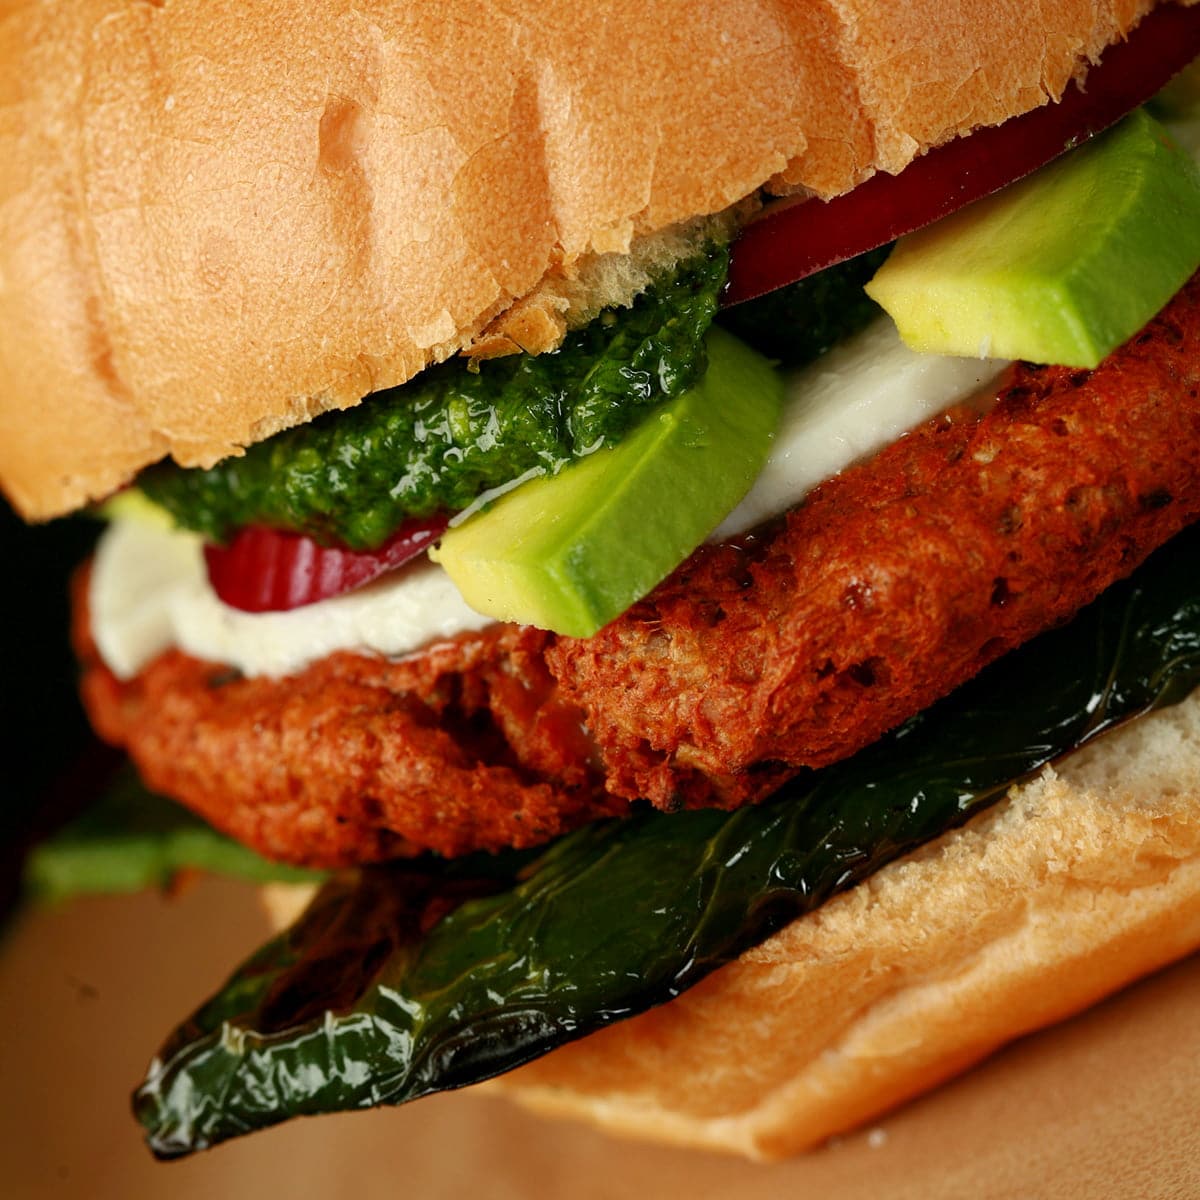 A close up view of a fully decked out vegetarian chorizo burger. Aside from the patty, a slice of roasted poblano, slices of red onion, a white cheese, and avocados are seen. A deep green cilantro pesto tops it all off.